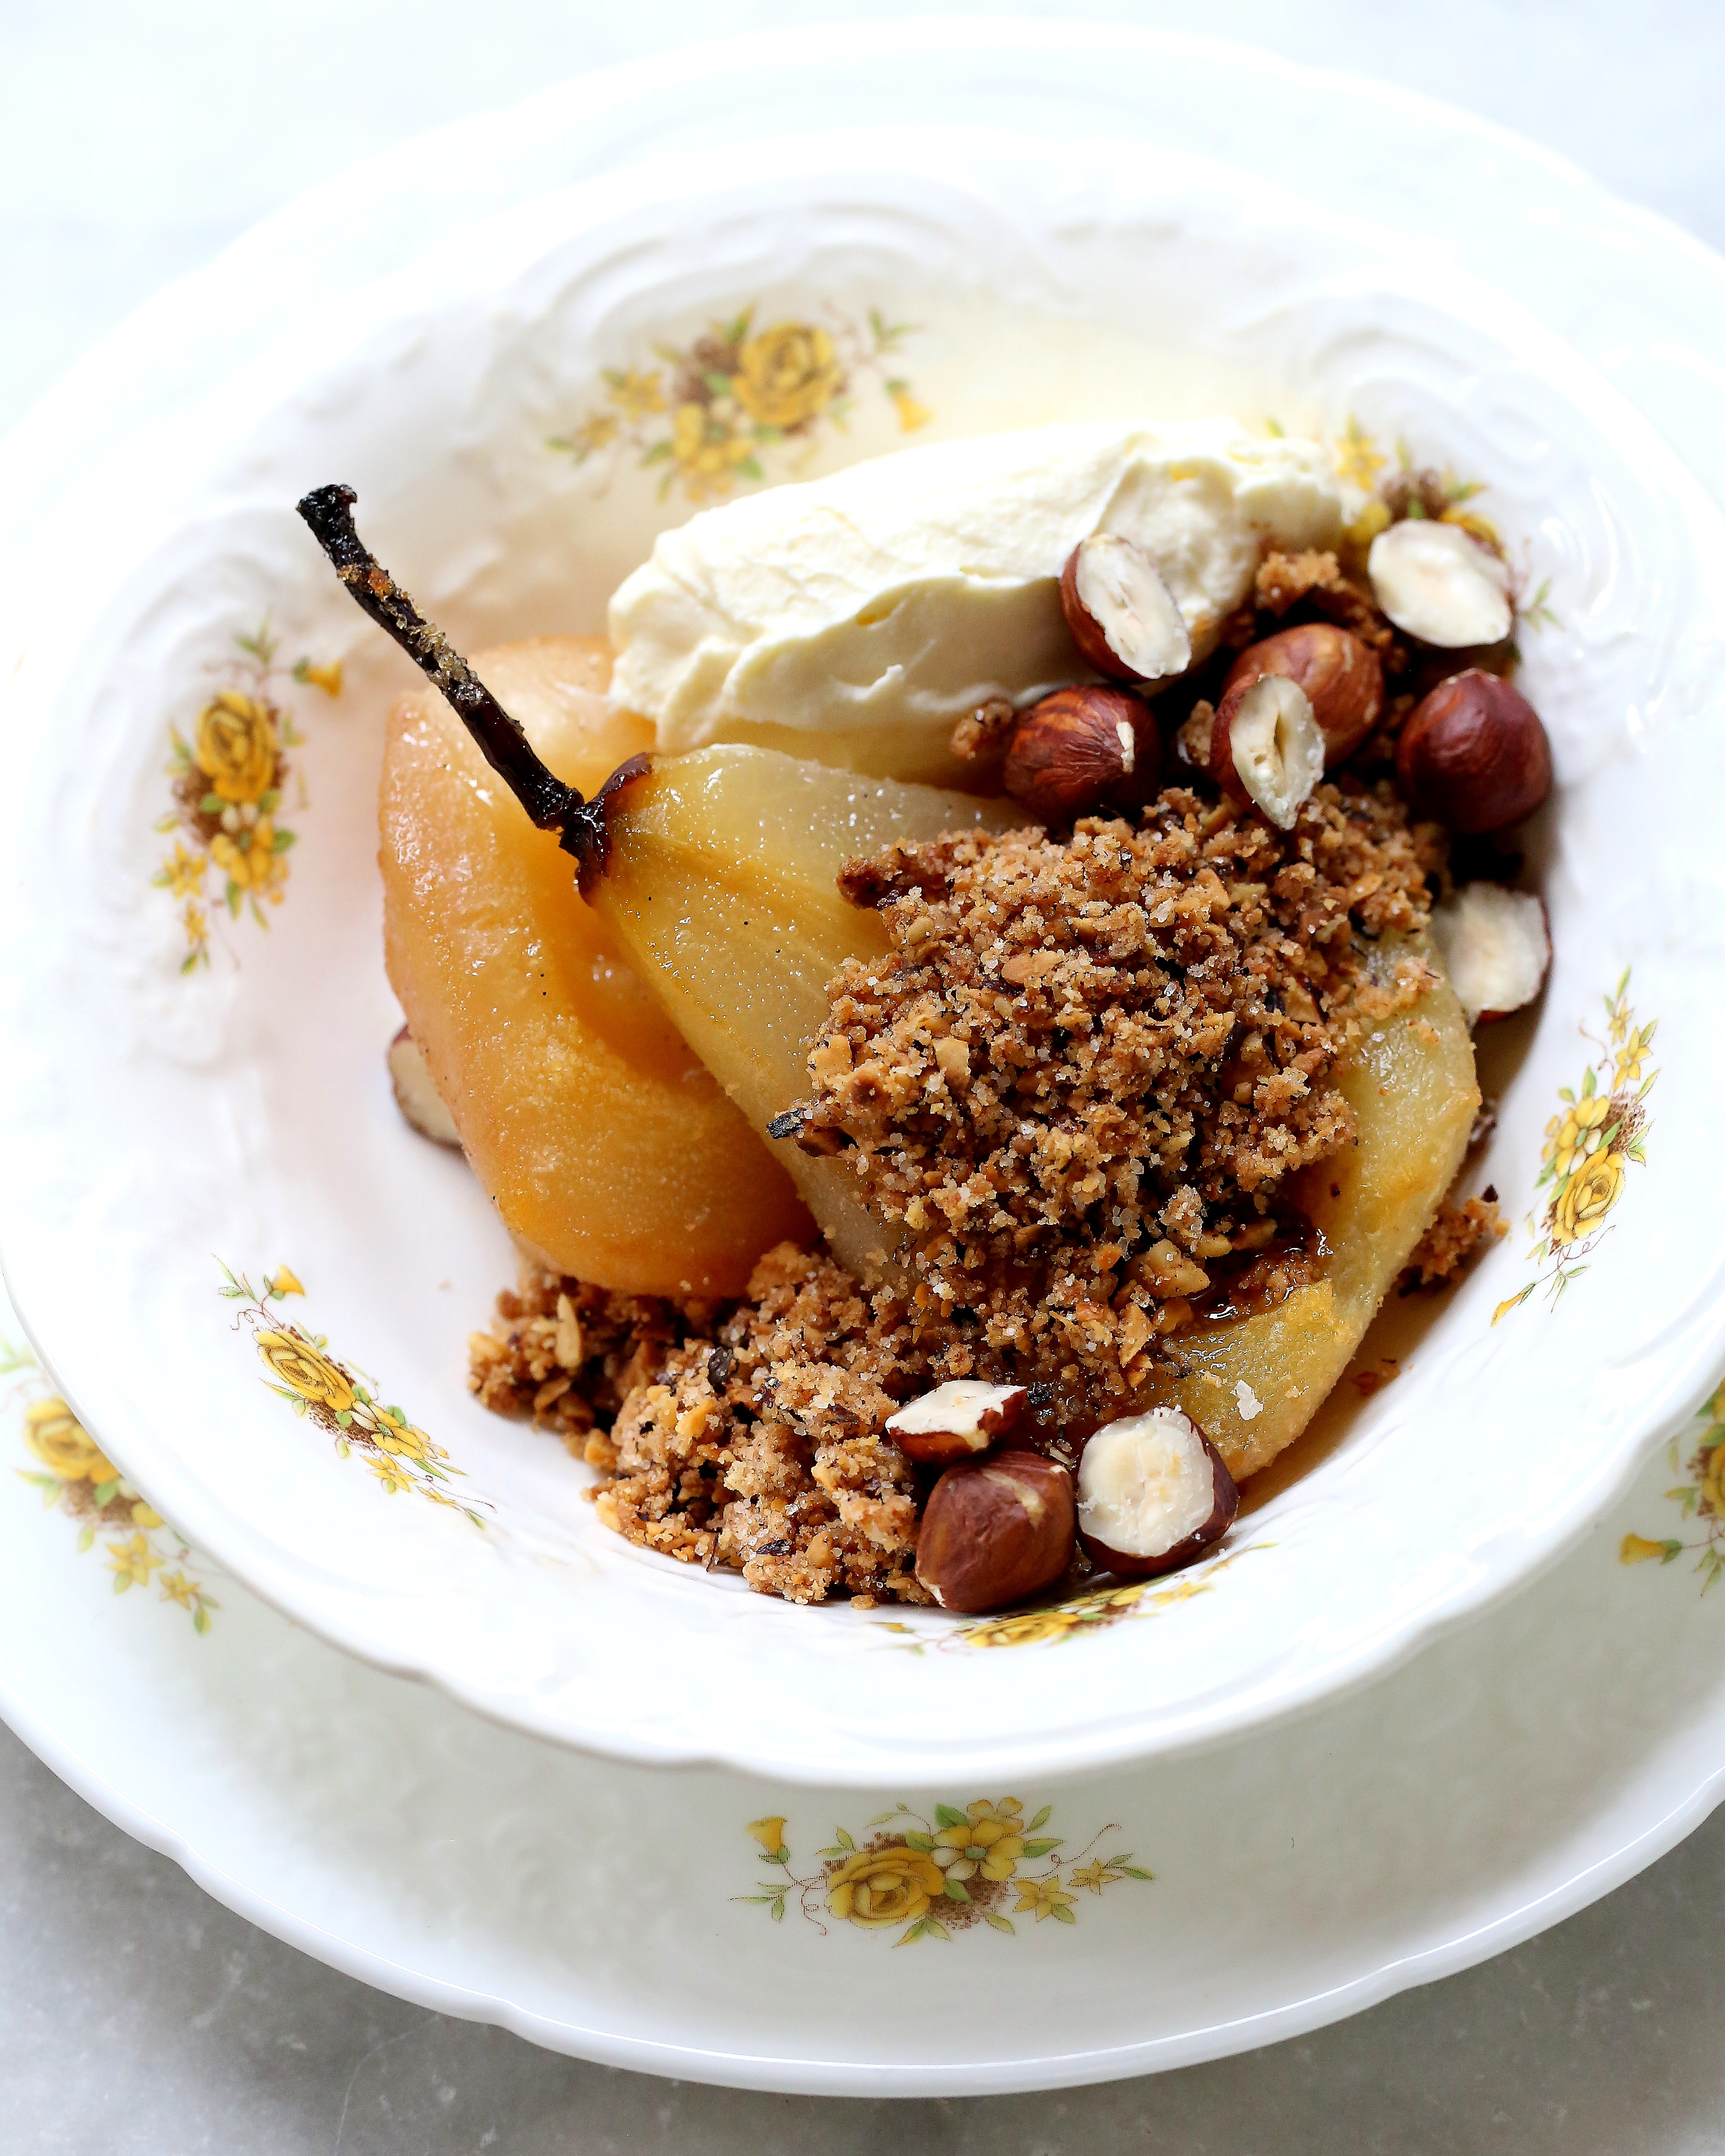 Baked Pear Desserts
 Baked Pears – The Dessert Spoon